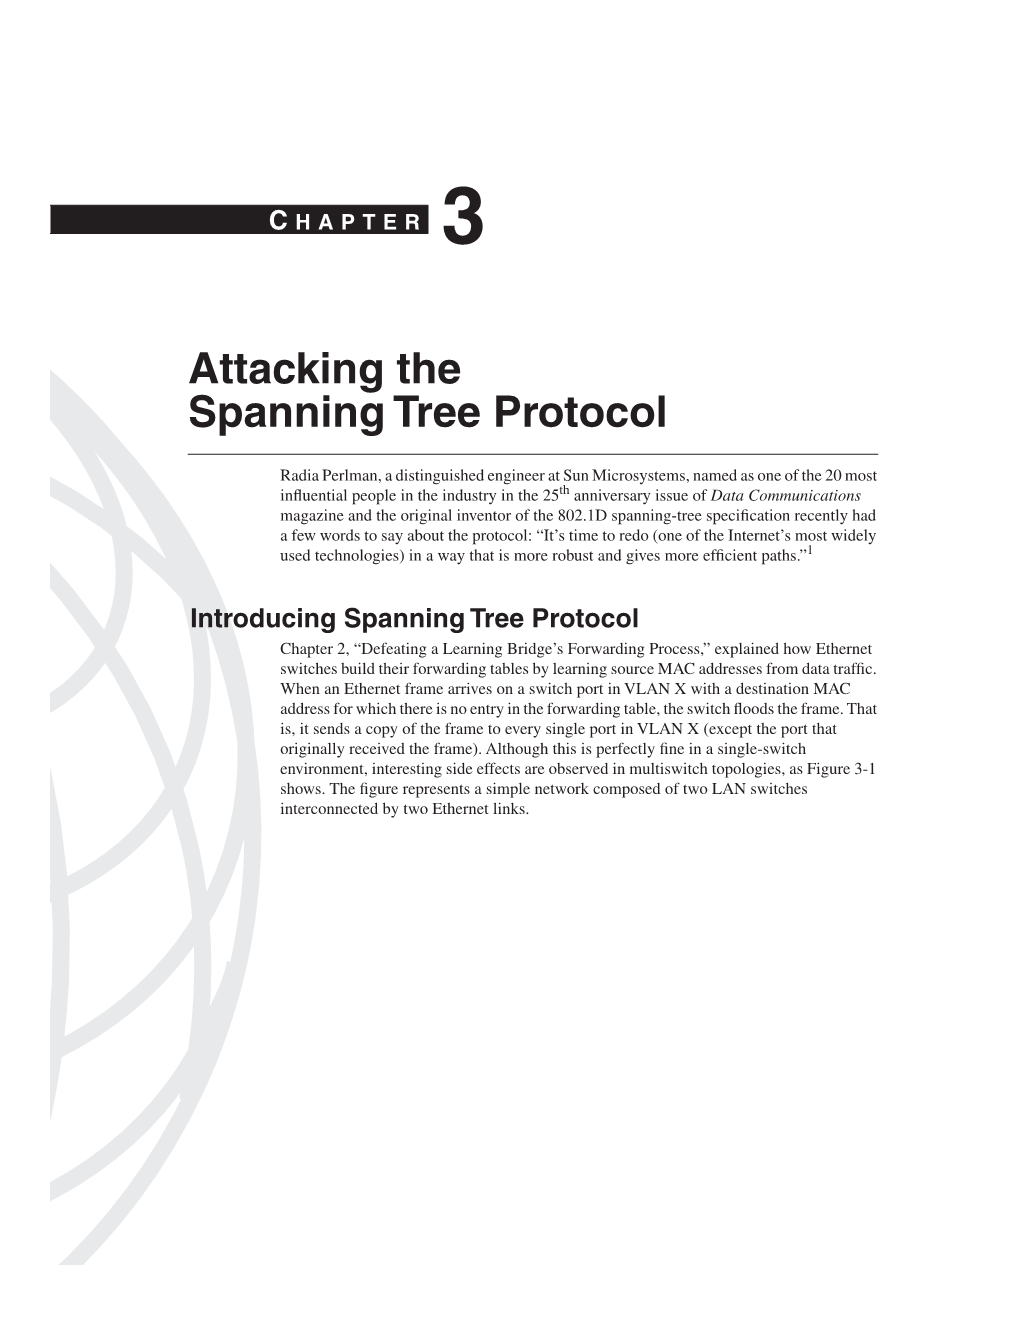 Attacking the Spanning Tree Protocol